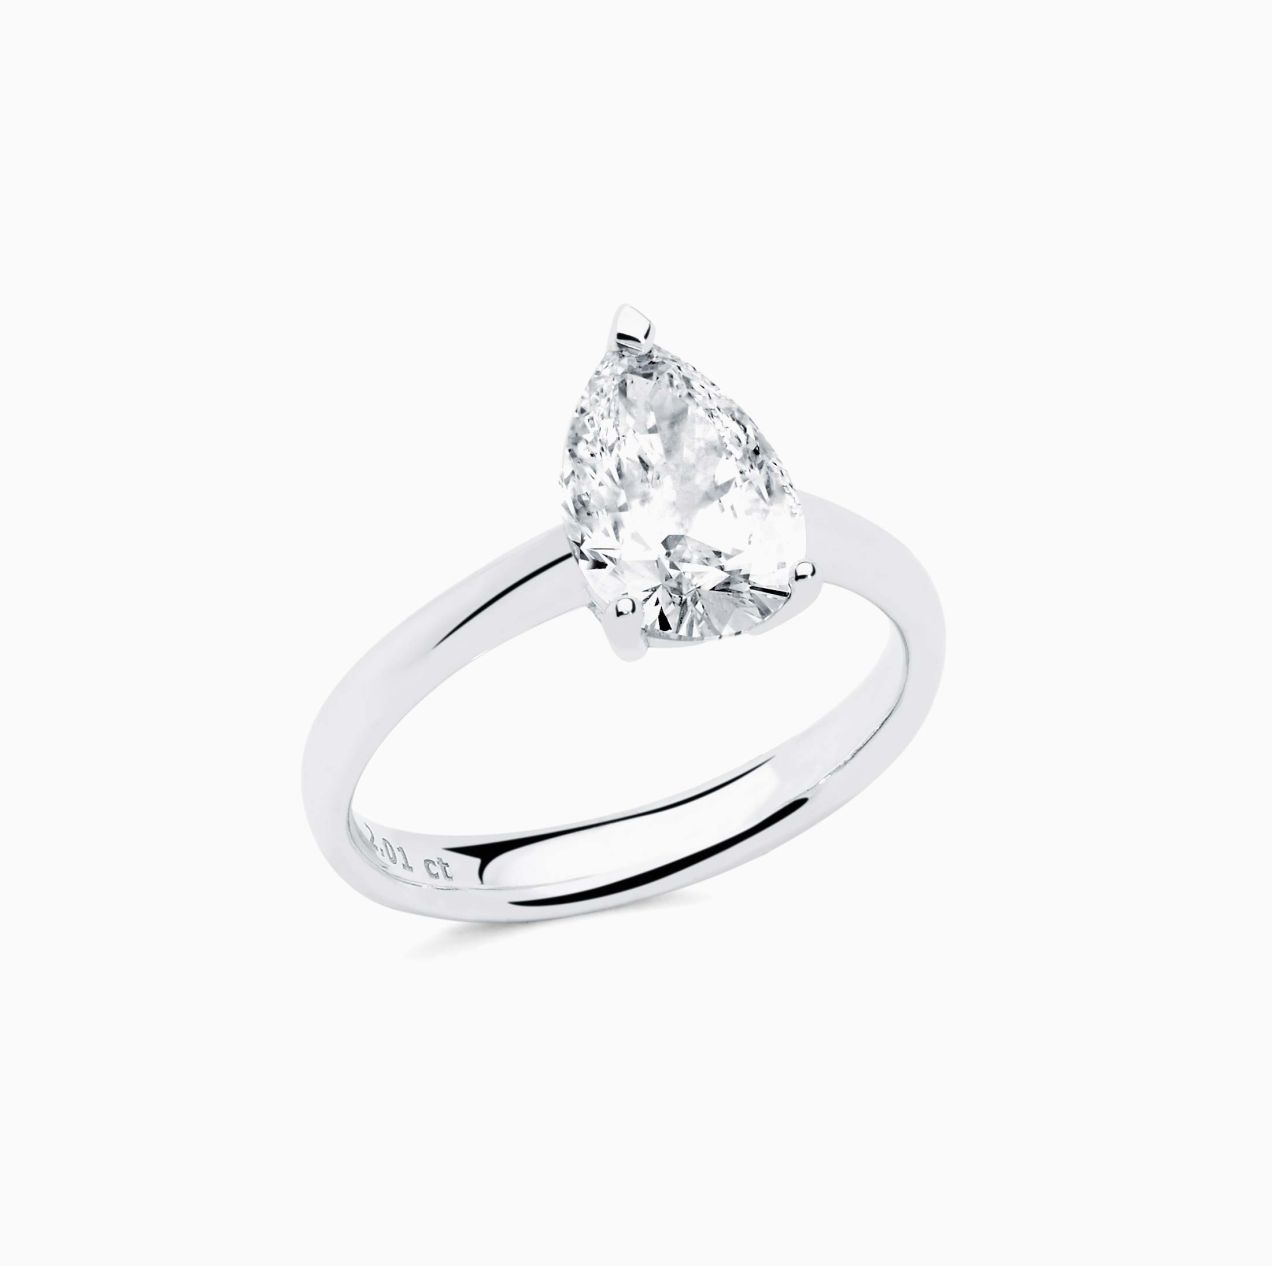 White gold with pear size diamond in the center solitaire ring